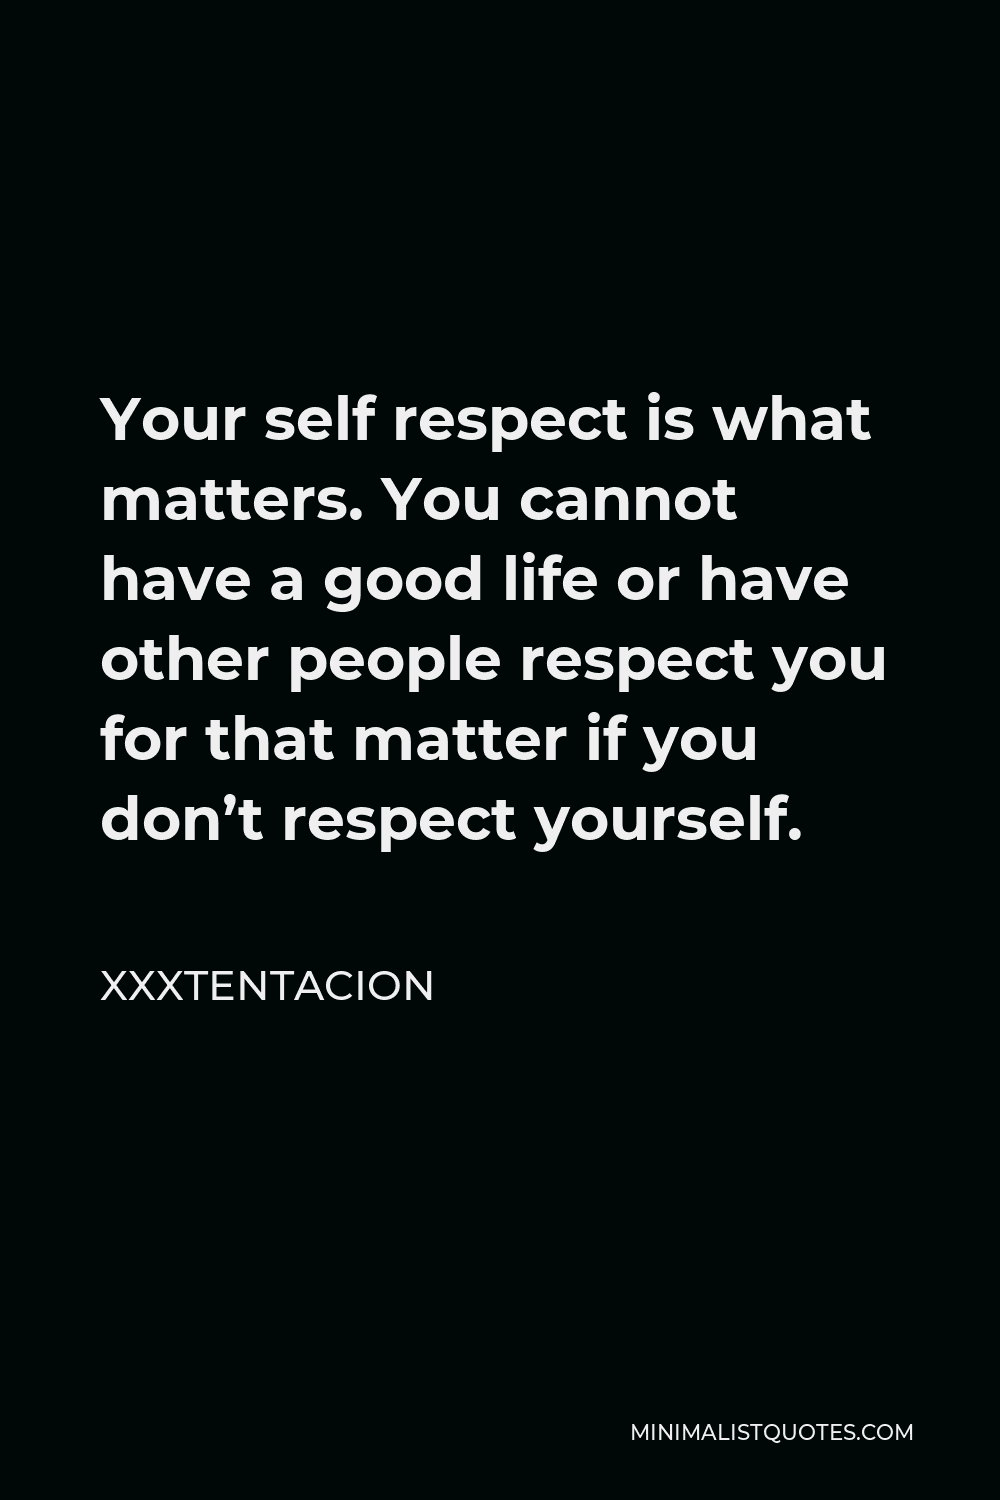 Xxxtentacion Quote: Your self respect is what matters. You cannot ...